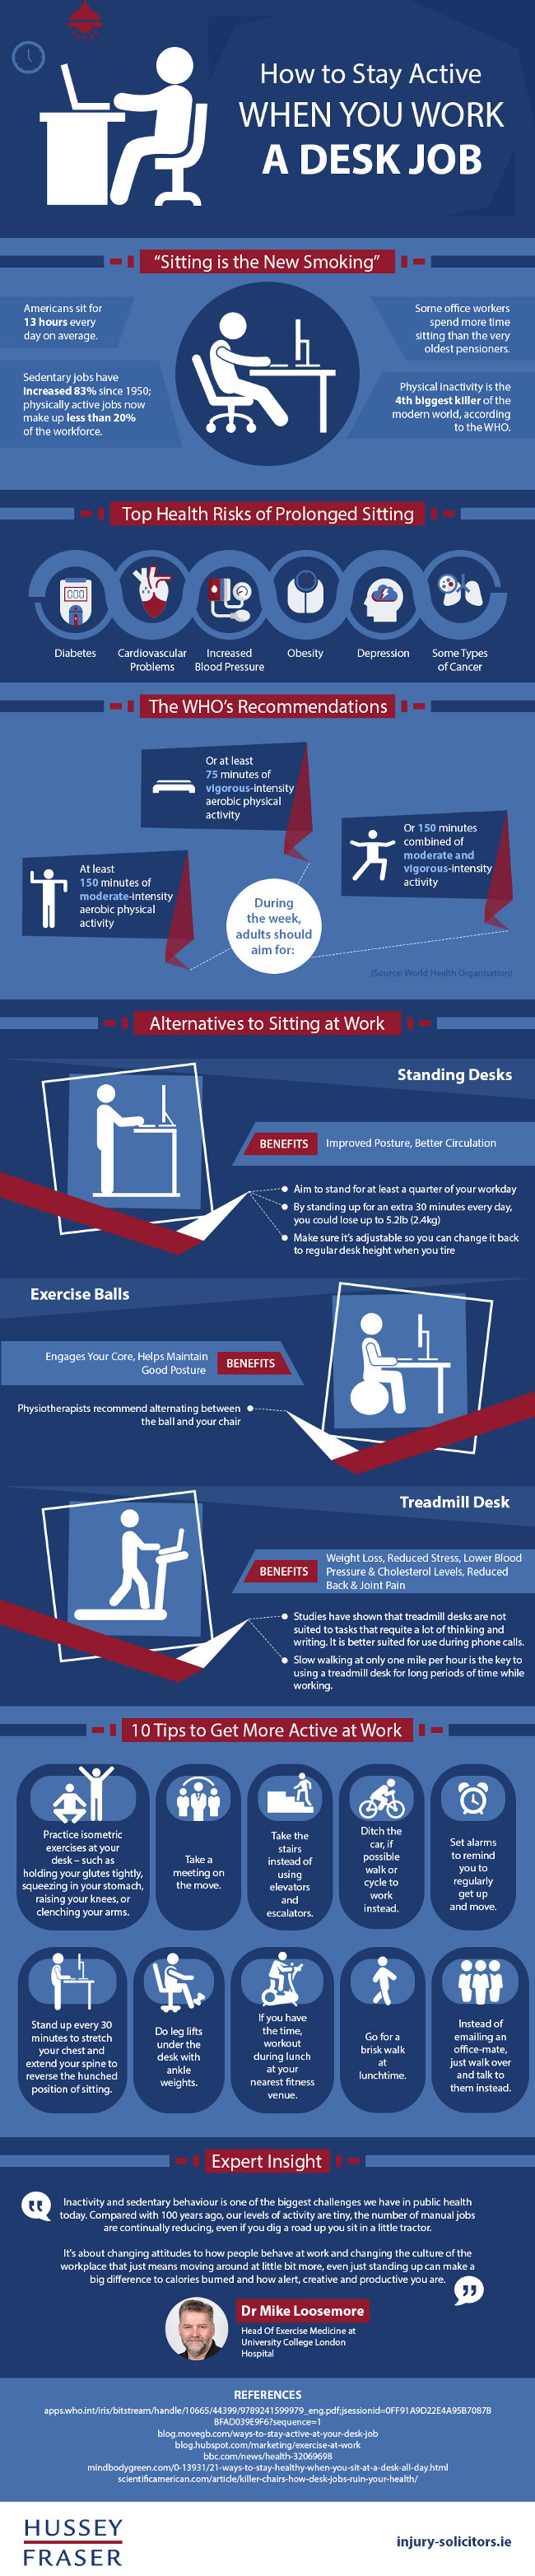 Strategies for staying active during a desk job